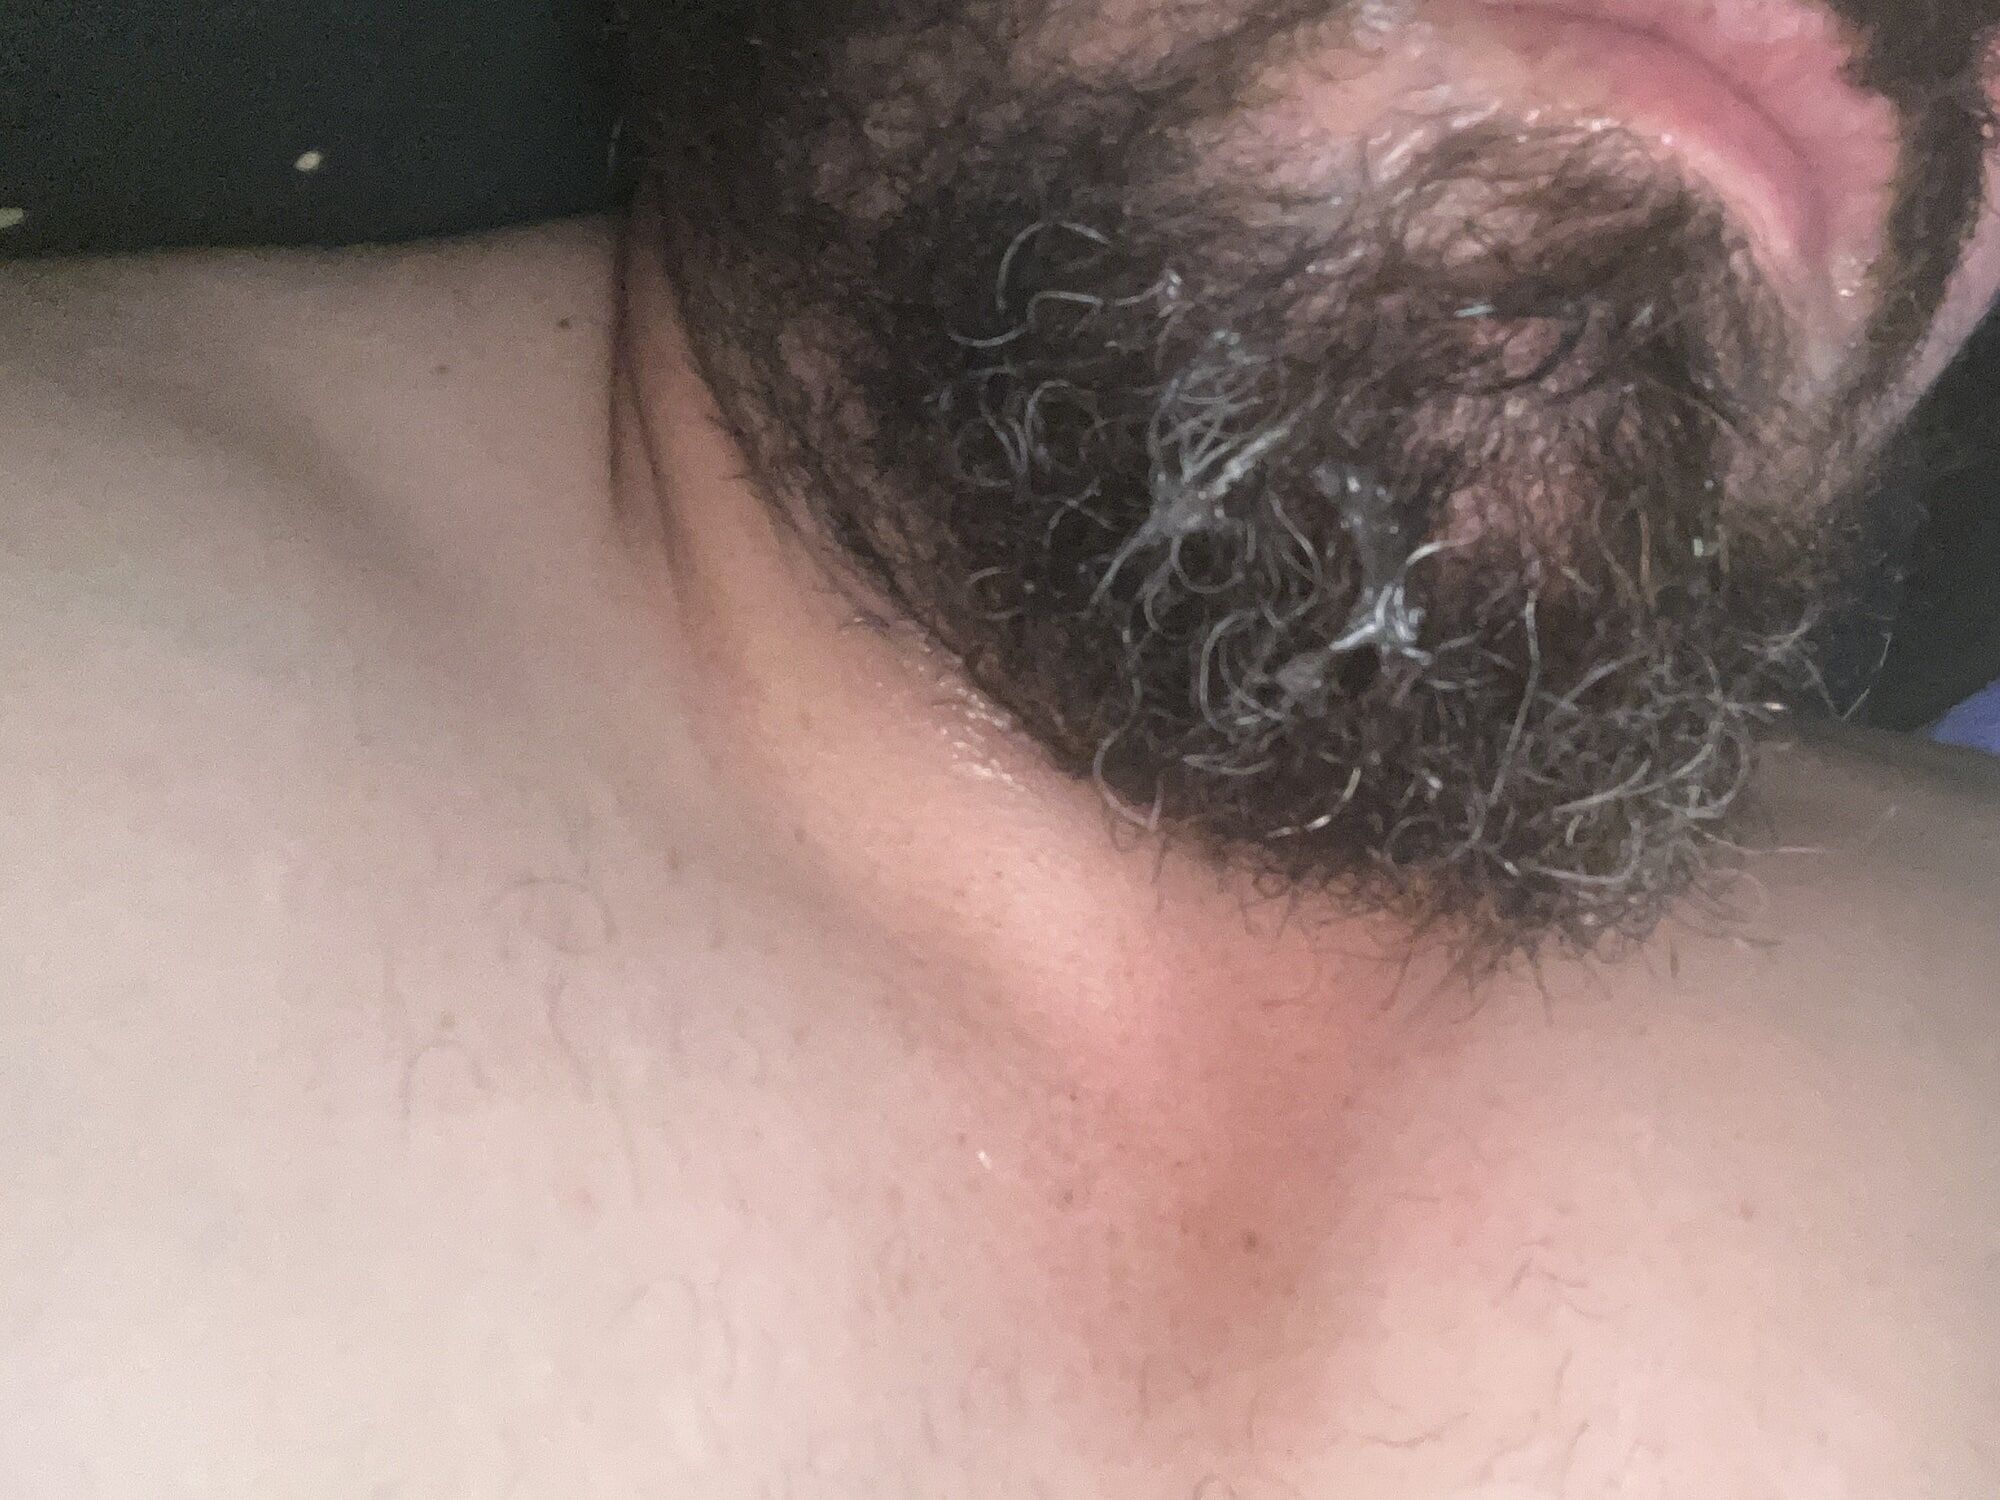  Beard images with spit #5